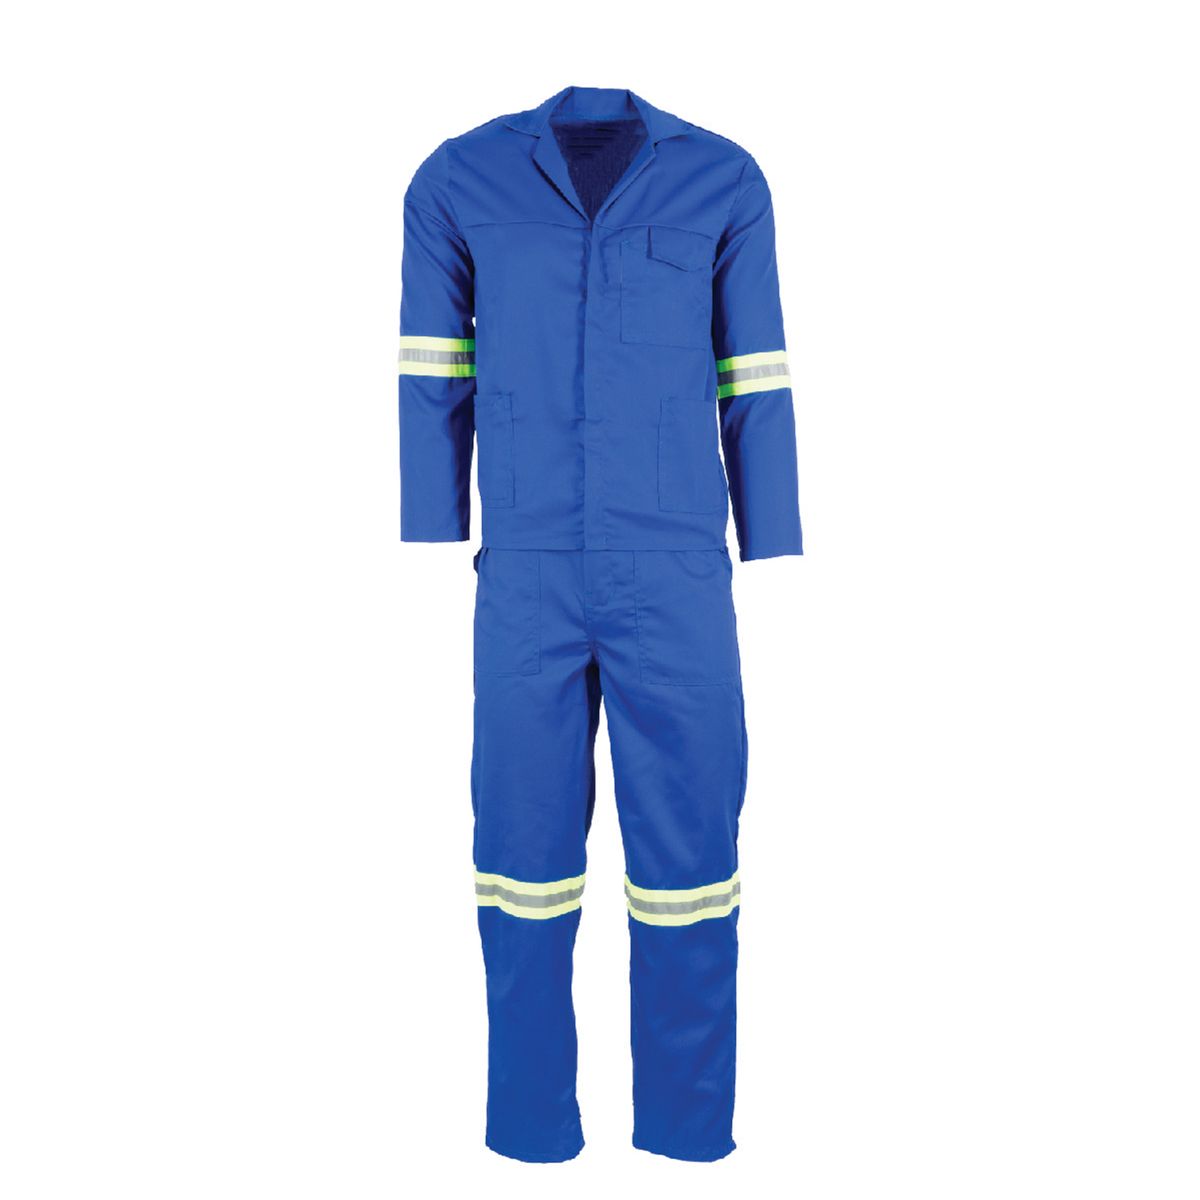 2 Piece Reflective Workwear Overall Conti Suit -Blue | Buy Online in ...